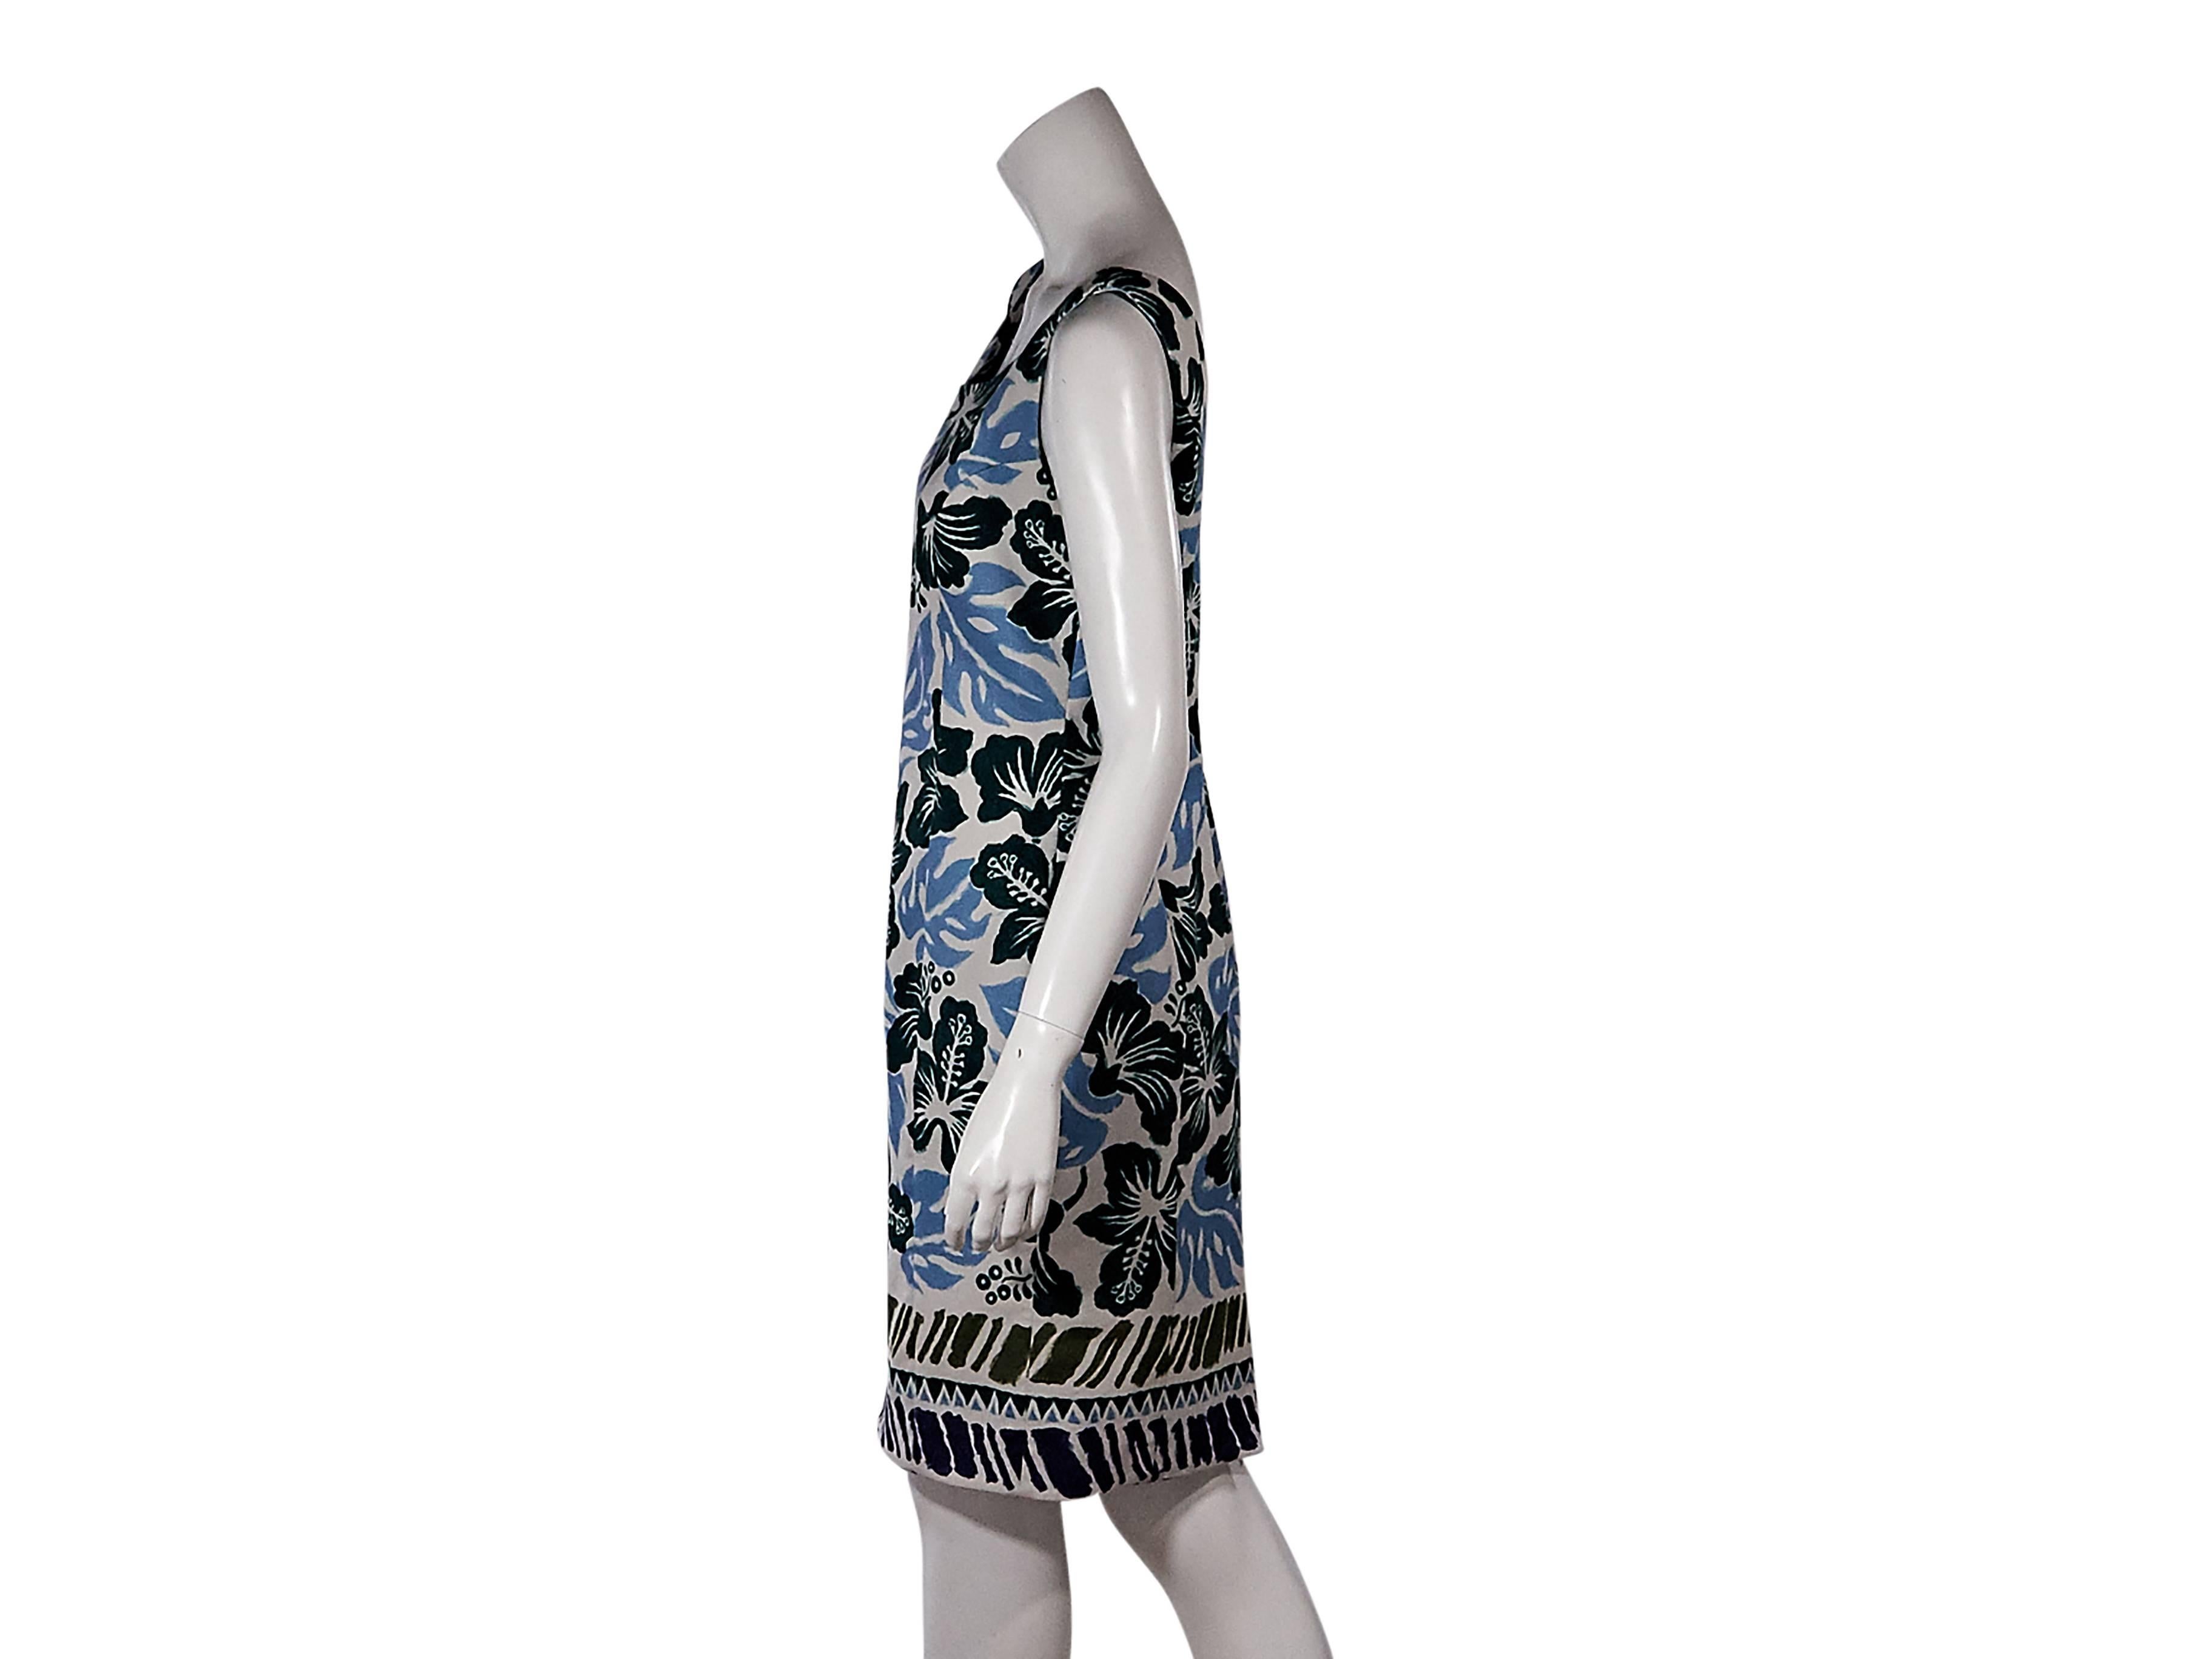 Product details:  Multicolor tropical-printed sheath dress by Prada.  Scoopneck.  Sleeveless.  Princess seams create a flattering silhouette.  Scoopback.  Concealed back zip closure.  Back center hem vent. Size 10
Condition: Pre-owned. Very